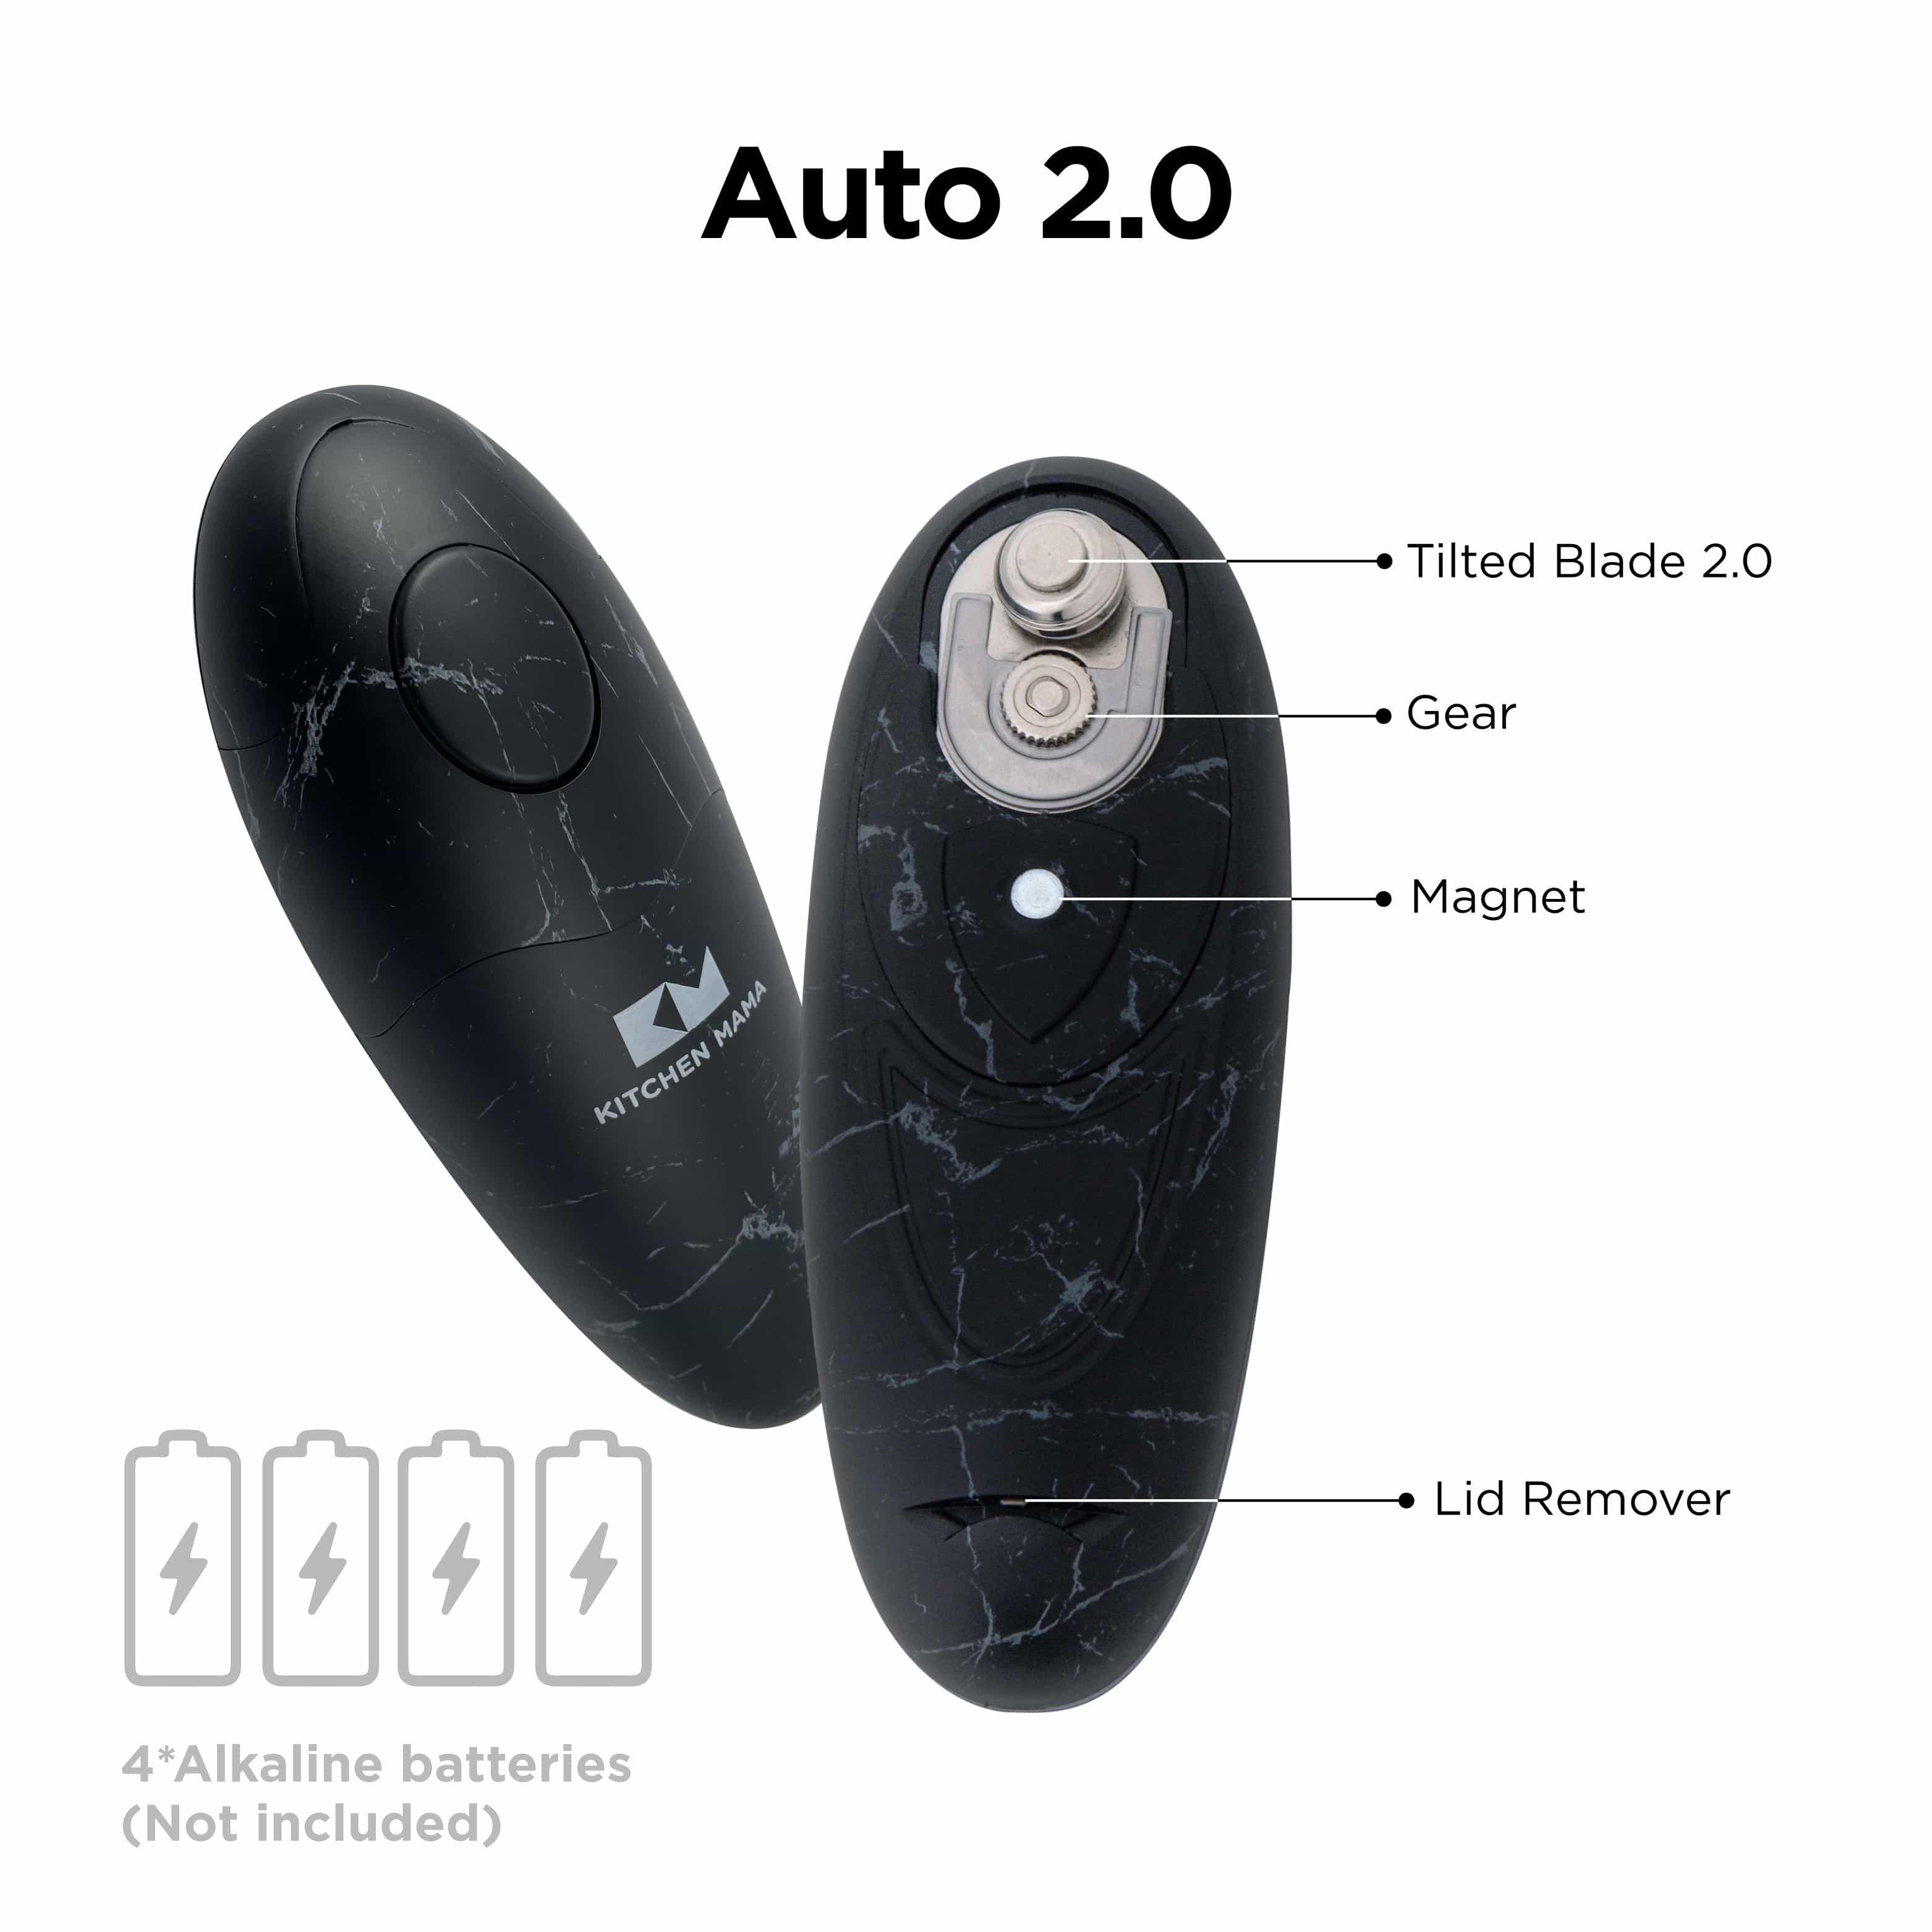 Electric Can Opener - Auto 2.0, Kitchen Mama, Marble Black, CO1150-ZW, electric can opener smooth edge, safety can opener, automatic can opener, electric can openers prime, battery powered can opener